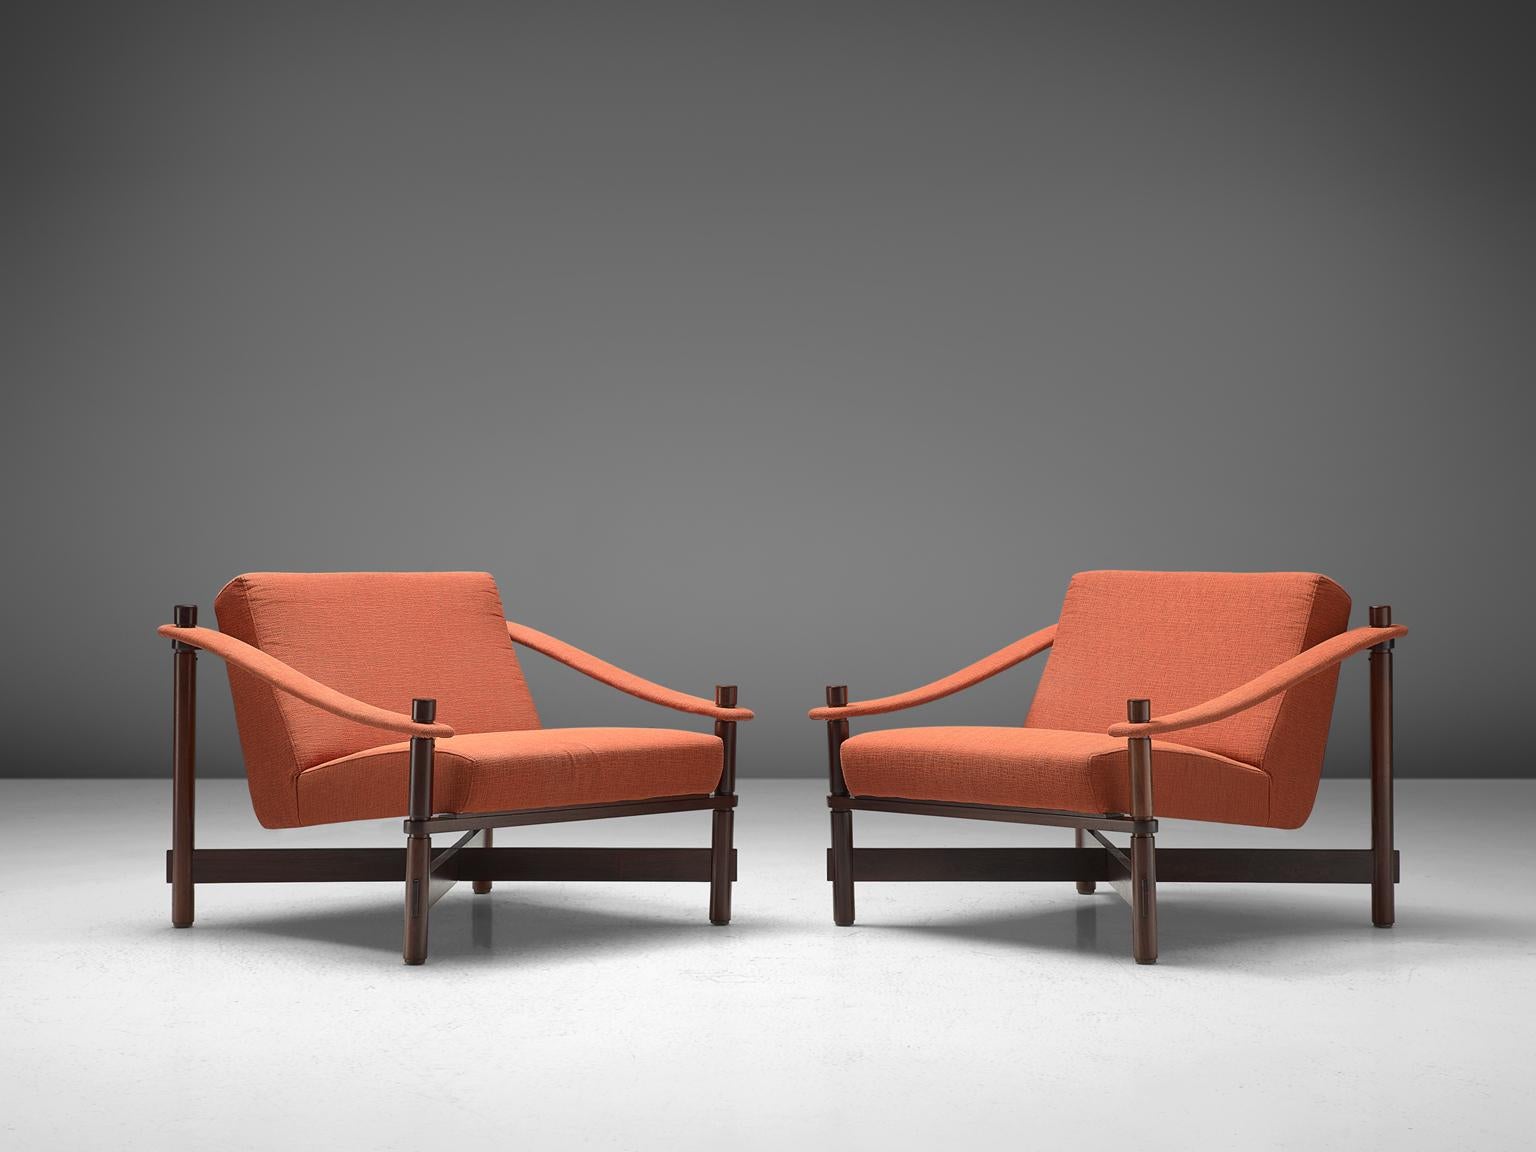 - Rafaella Crespi, pair of lounge chairs, rosewood and fabric, Italy, 1960. €14000
- 5 meters of fabric: Dedar, Alexander, Col.110 Avorio as inquired by client for local reupholstery for two chairs €750
- Augusto Savini by Pozzi, set of eight dining